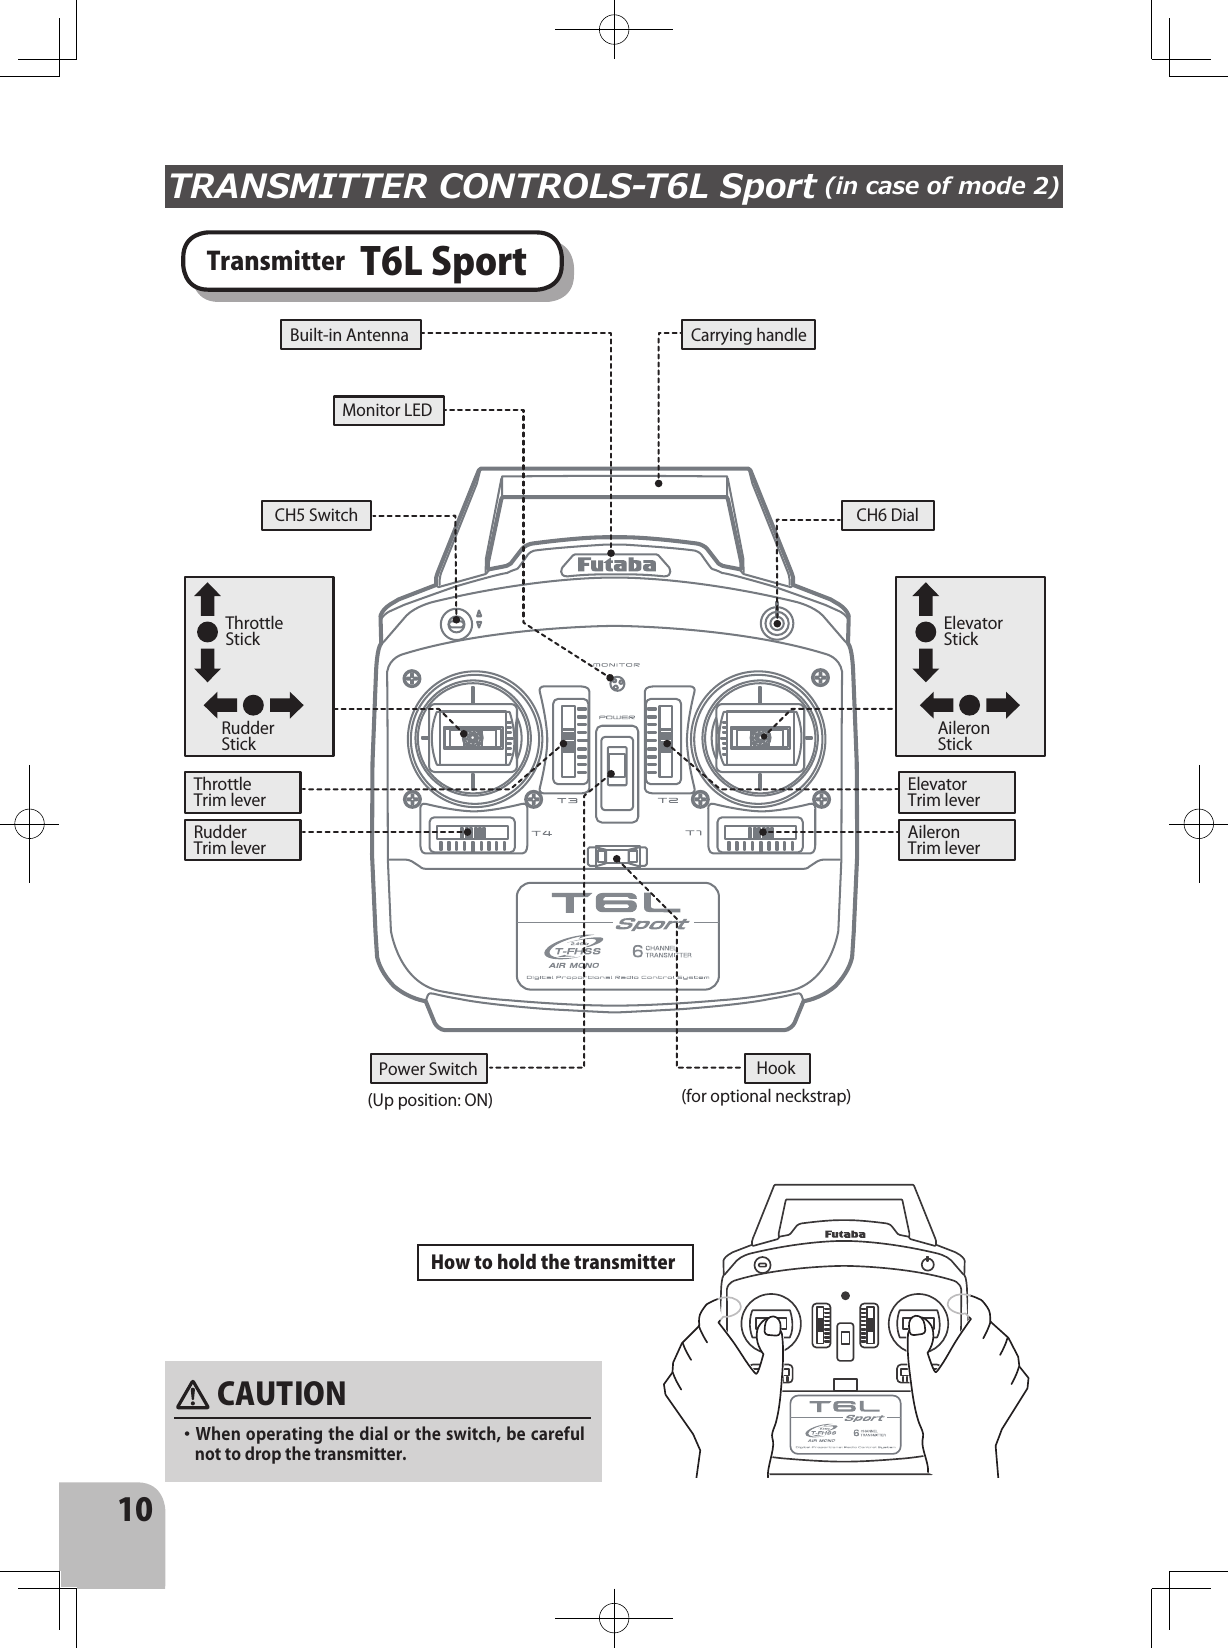 10TRANSMITTER CONTROLS-T6L Sport (in case of mode 2)Transmitter   T6L SportCarrying handleCH5 SwitchBuilt-in AntennaMonitor LEDCH6 DialRudderStickThrottleStickThrottleTrim leverRudderTrim leverElevatorTrim leverAileronTrim leverAileronStickElevatorStickPower Switch(Up position: ON)Hook(for optional neckstrap)How to hold the transmitter・When operating the dial or the switch, be careful not to drop the transmitter.　CAUTION